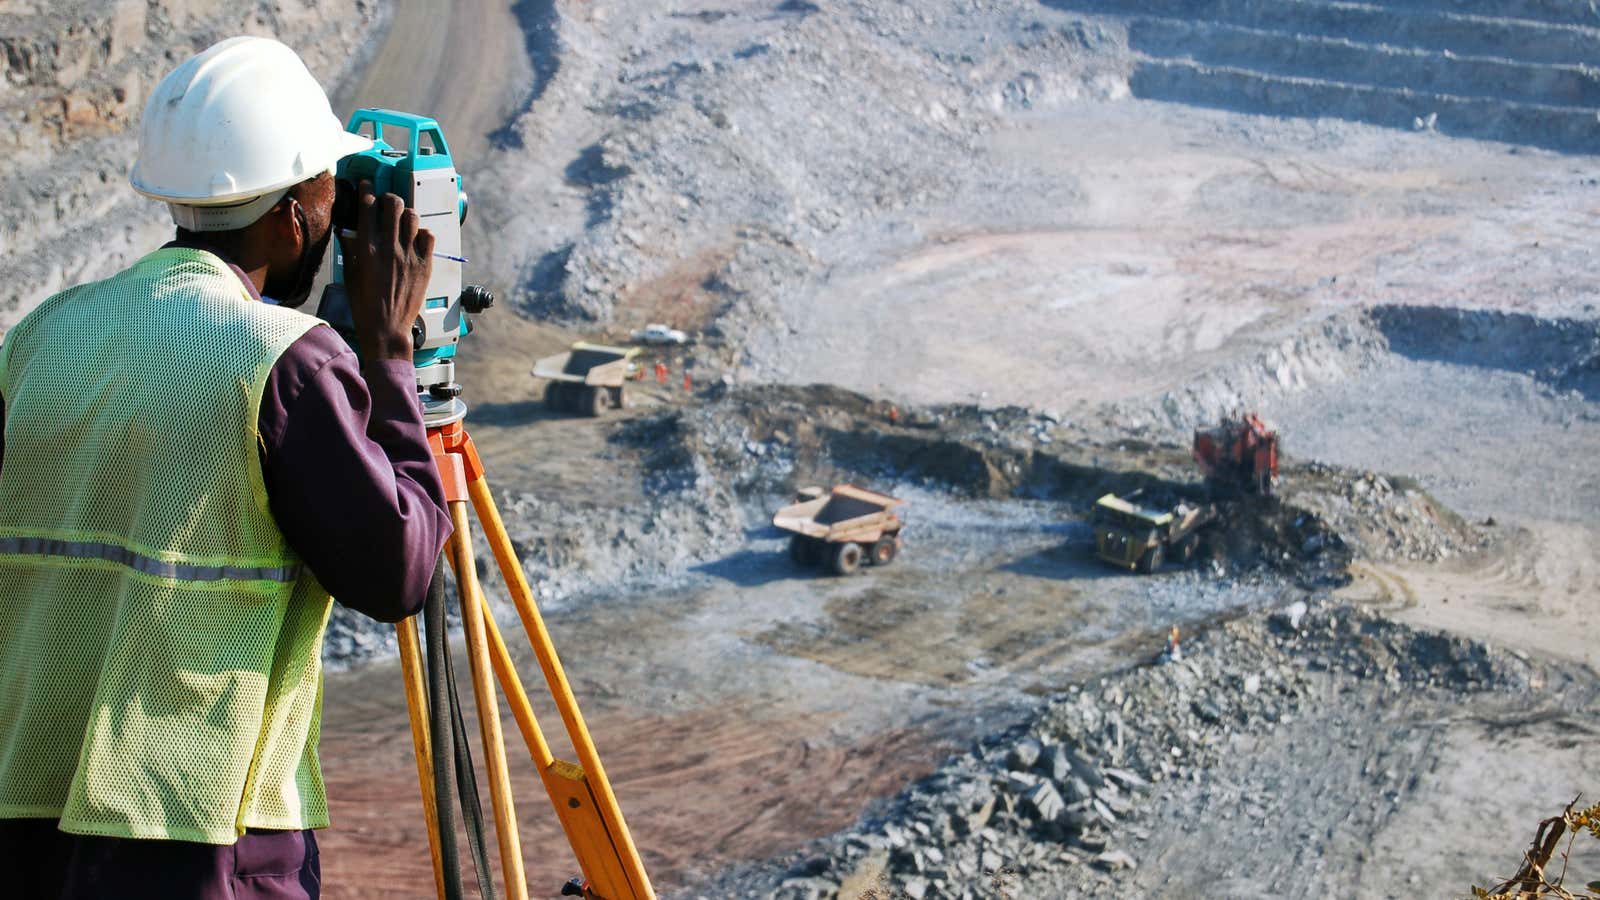 A Zambian surveyor sees an open-pit copper mine, and a world of possibility. Ah yes, possibility.